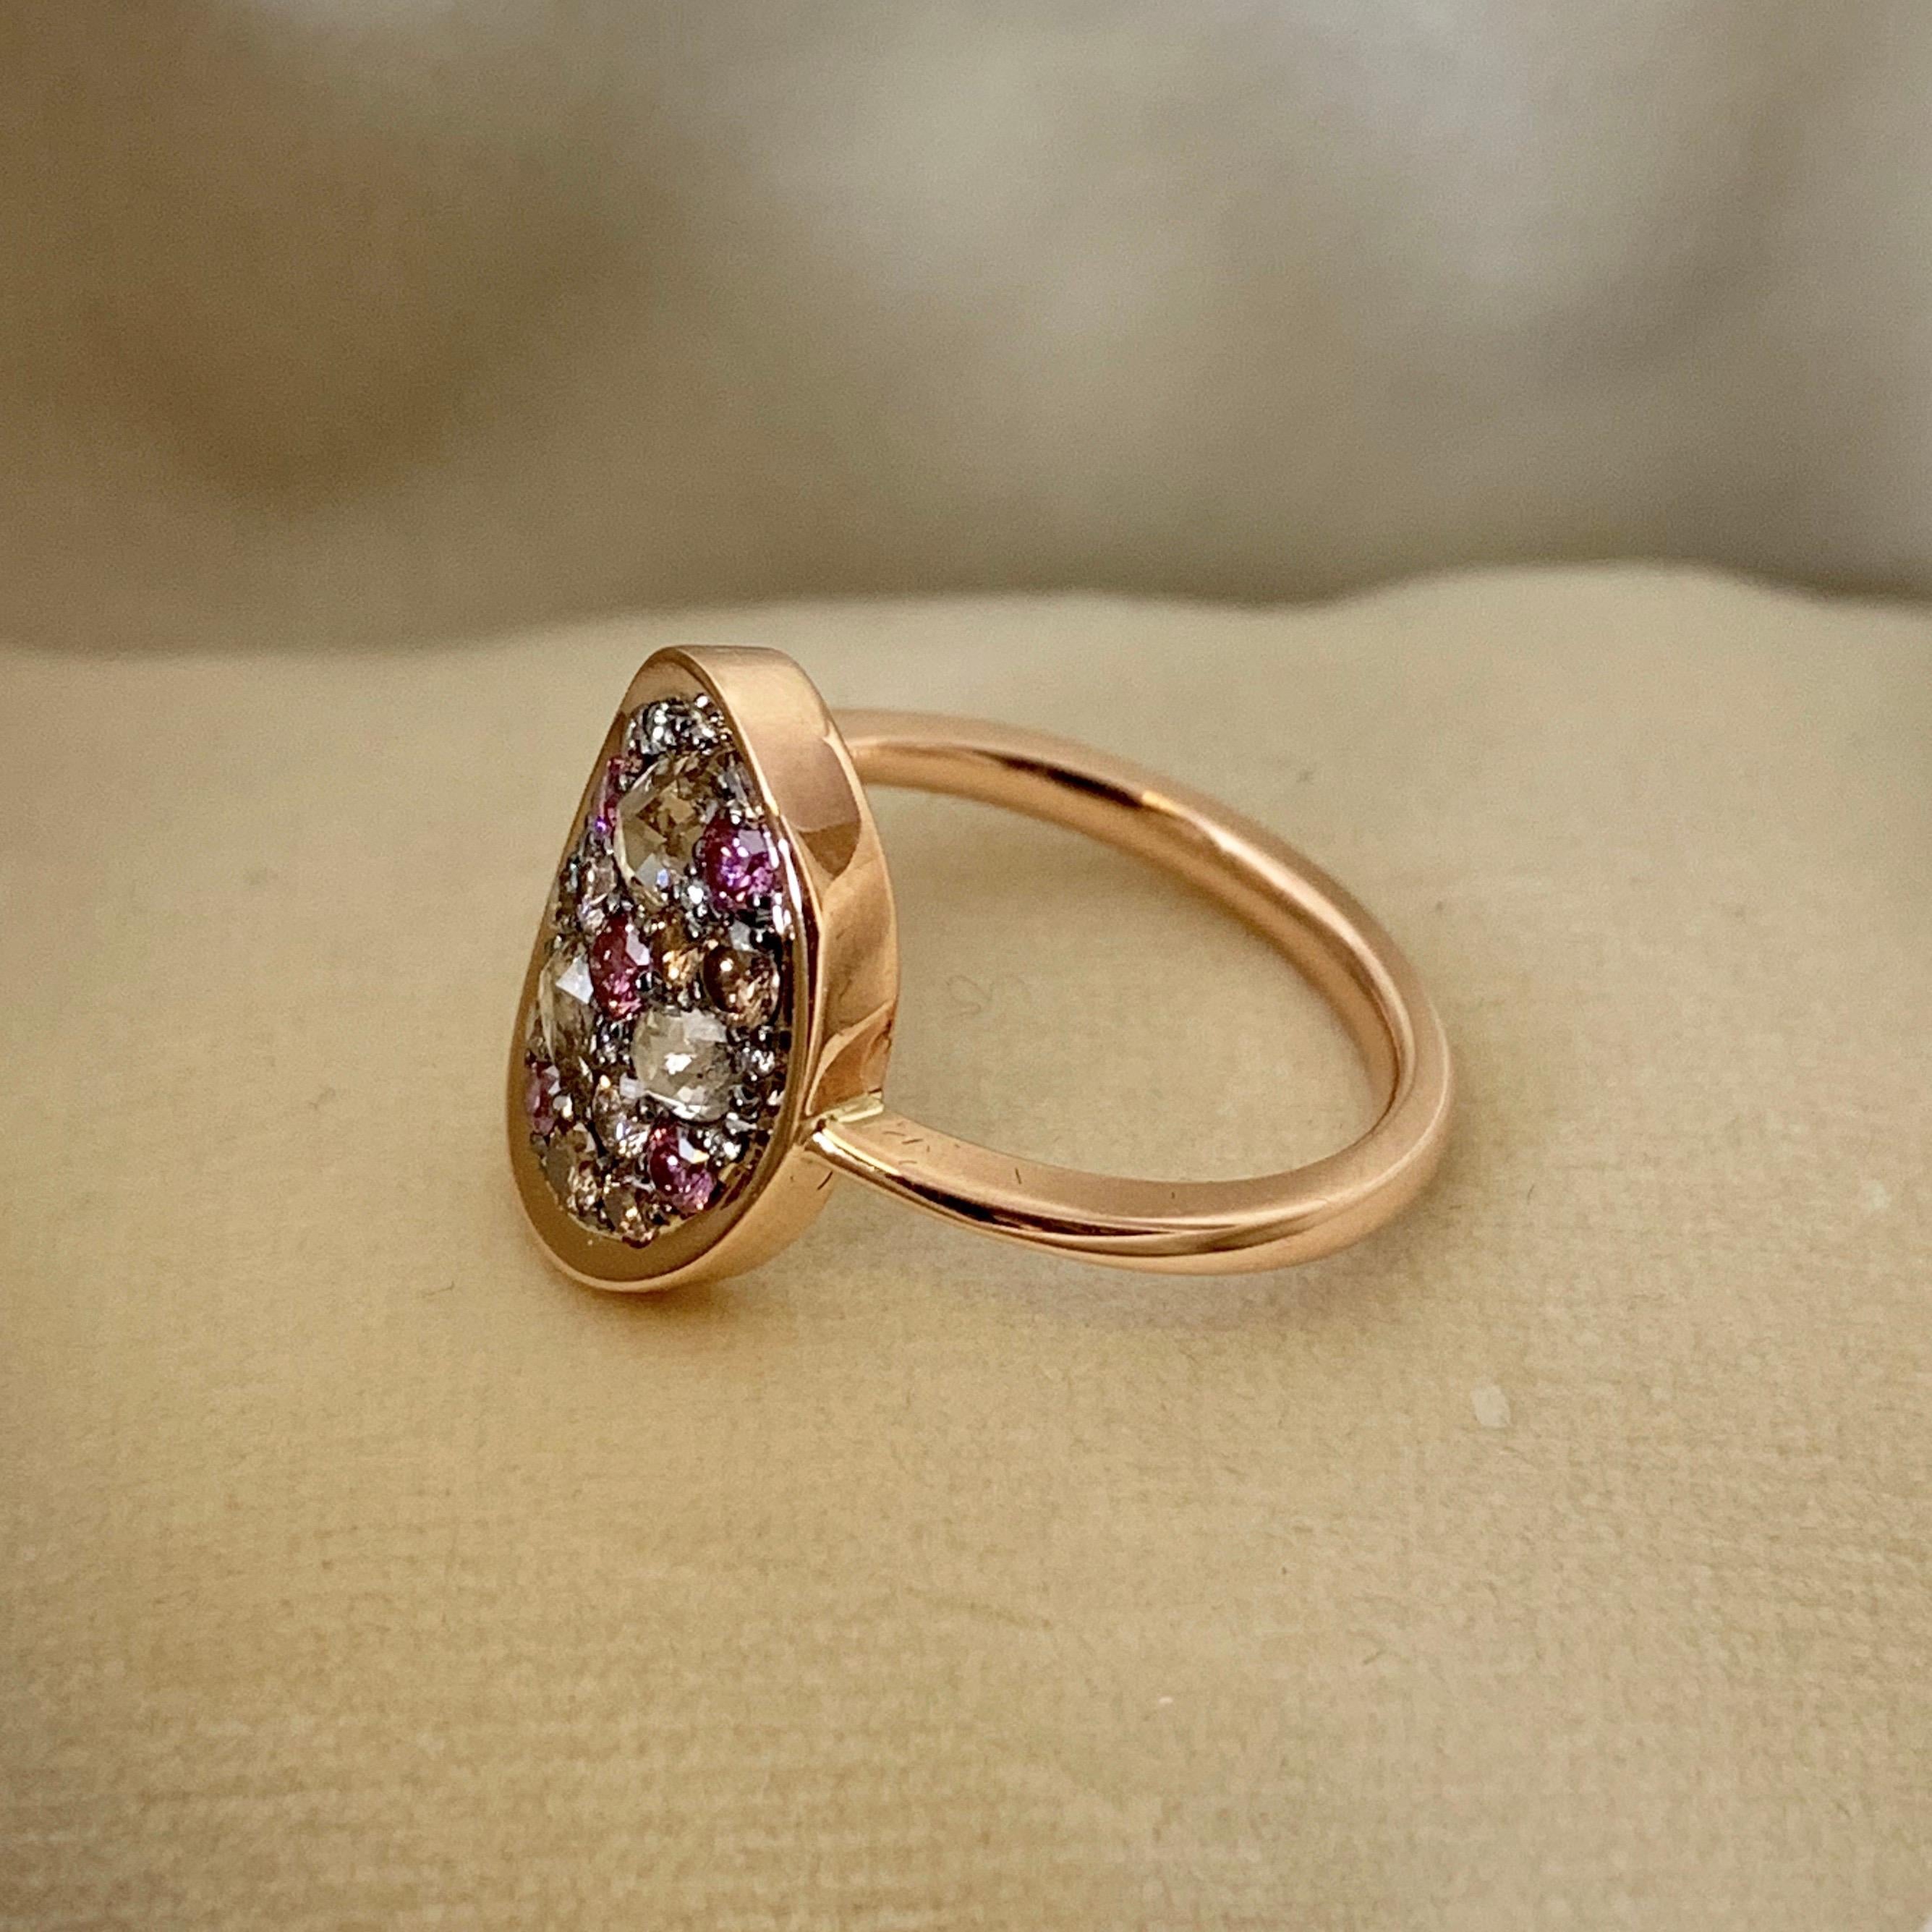 One of a kind ring handmade in Belgium by jewellery artist Joke Quick in 18K rose gold 3,9 g & blackened sterling silver (The stones are set on silver to create a black background for the stones)
Set with Fancy brown rose-cut diamonds 0,41 ct.,